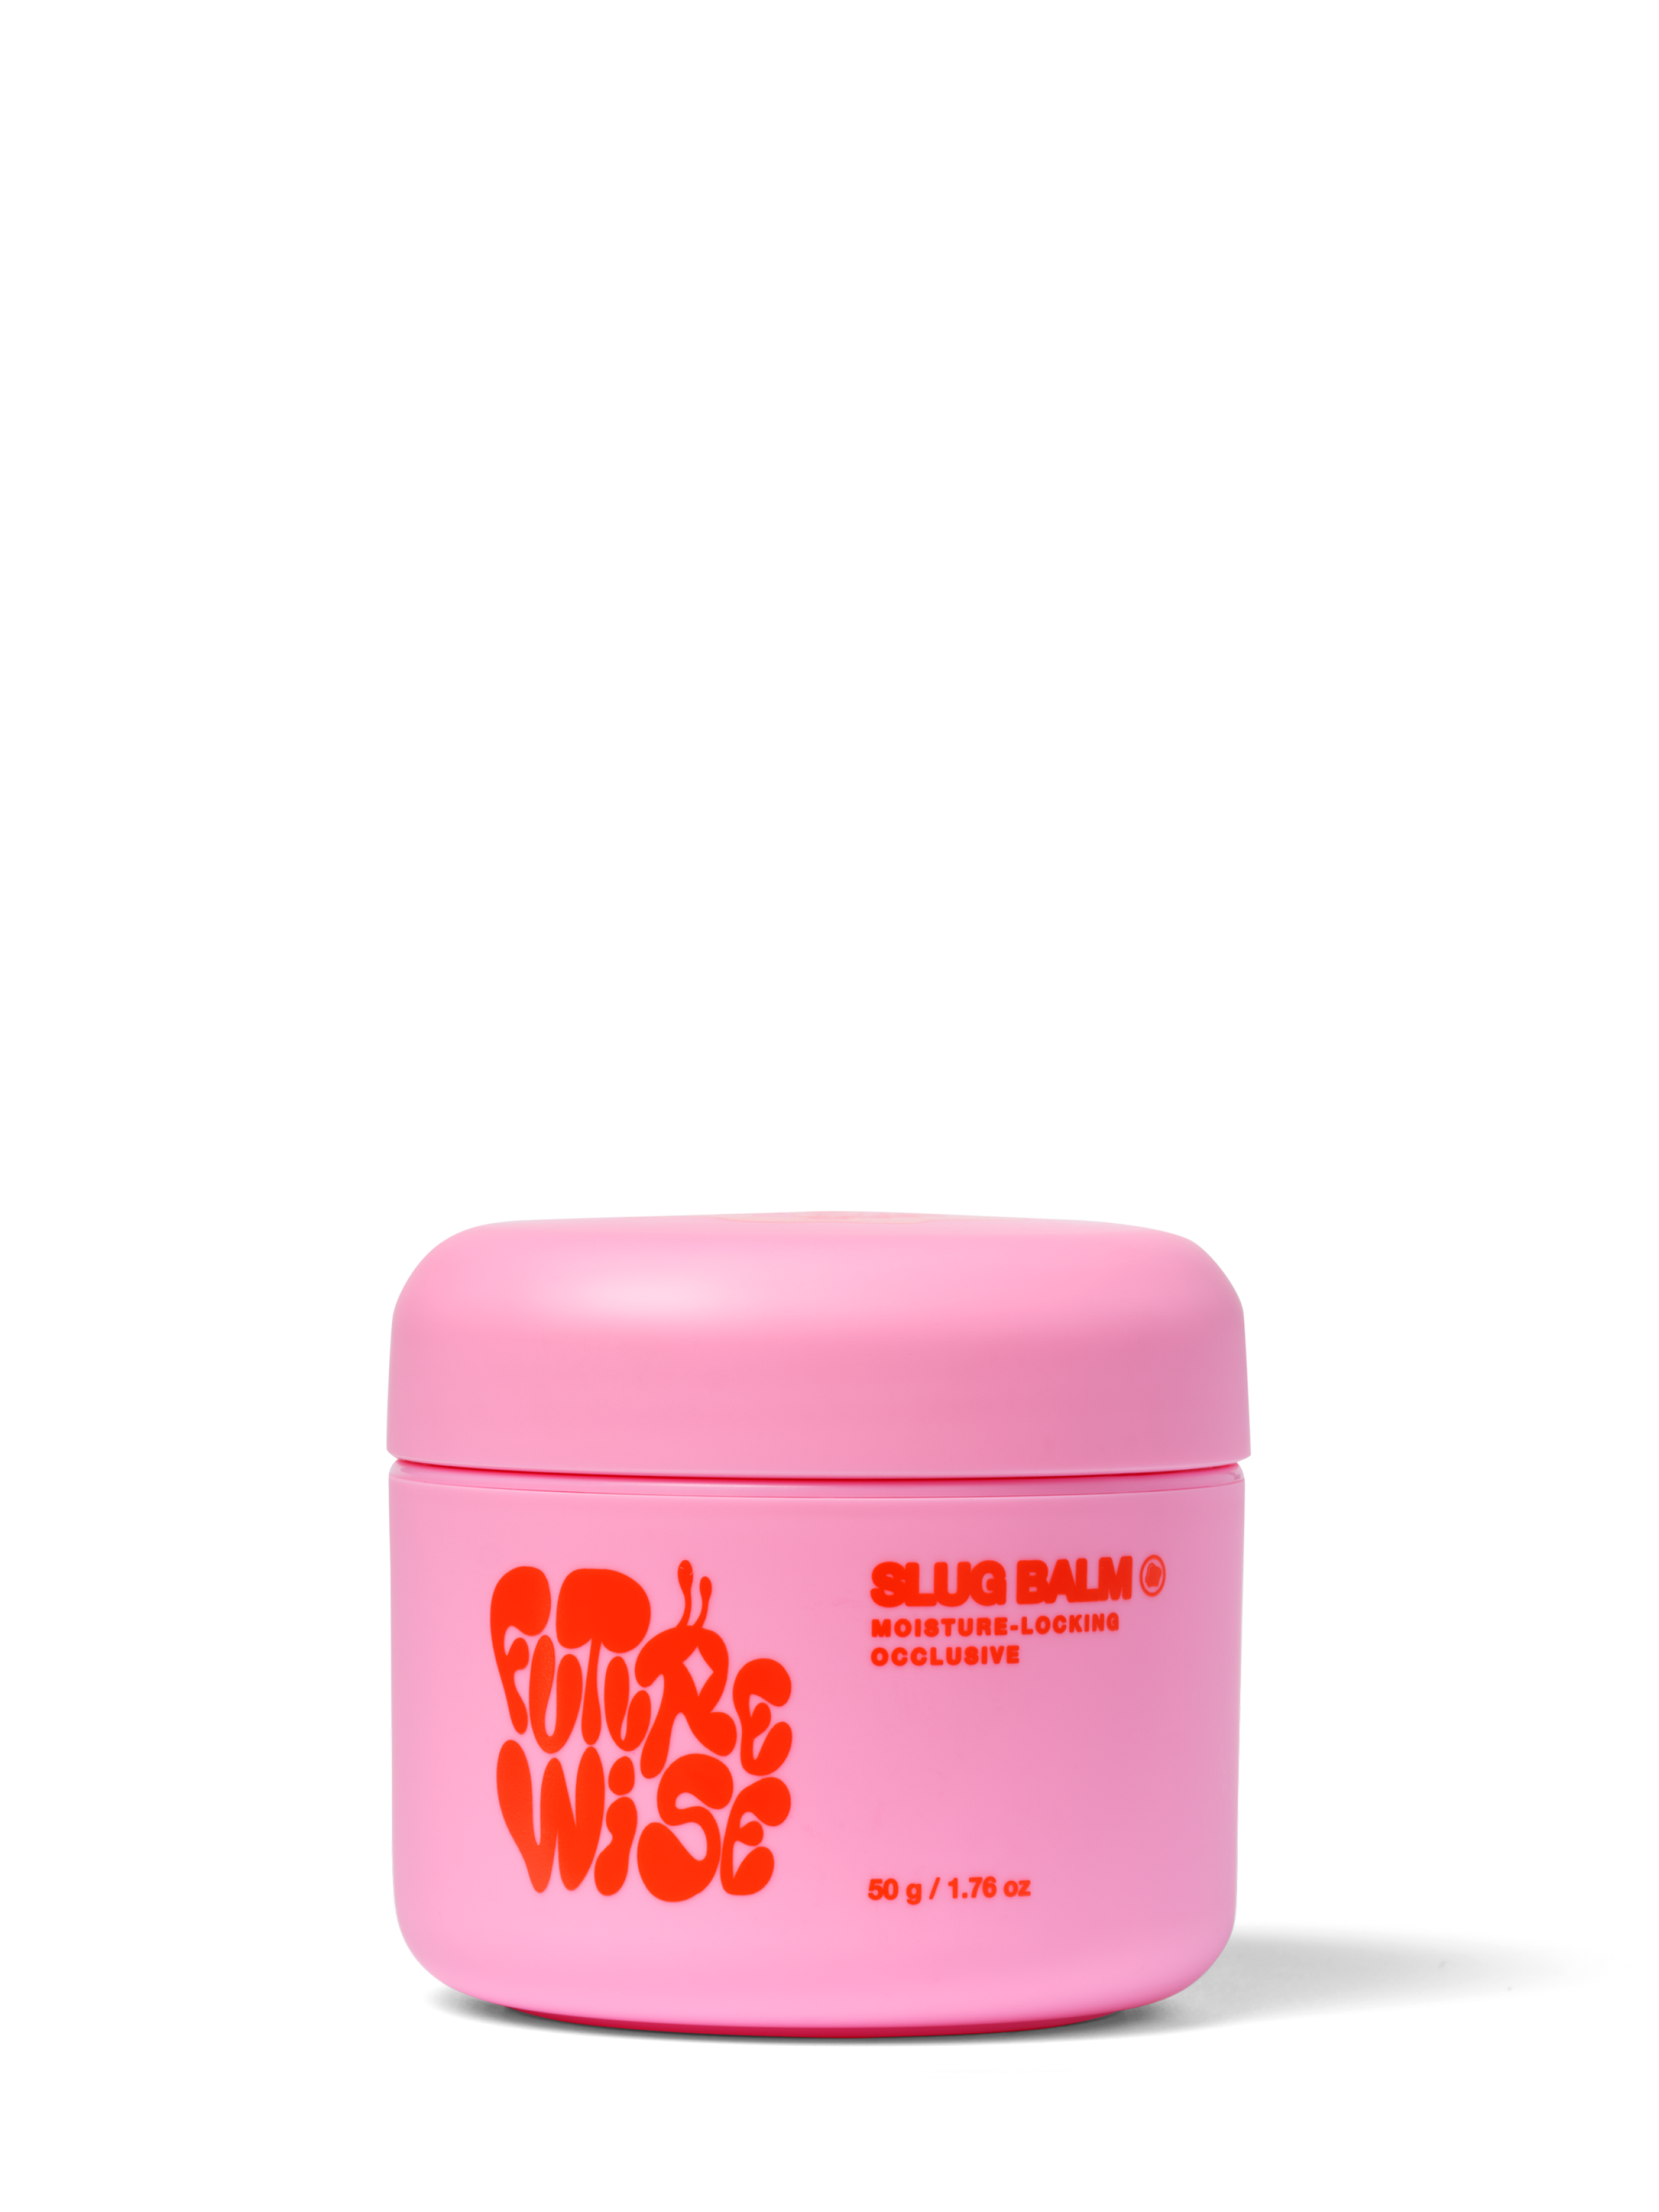 Front facing studio shot of the Slug Balm product, a pink jar with red text featuring the Futurewise logo